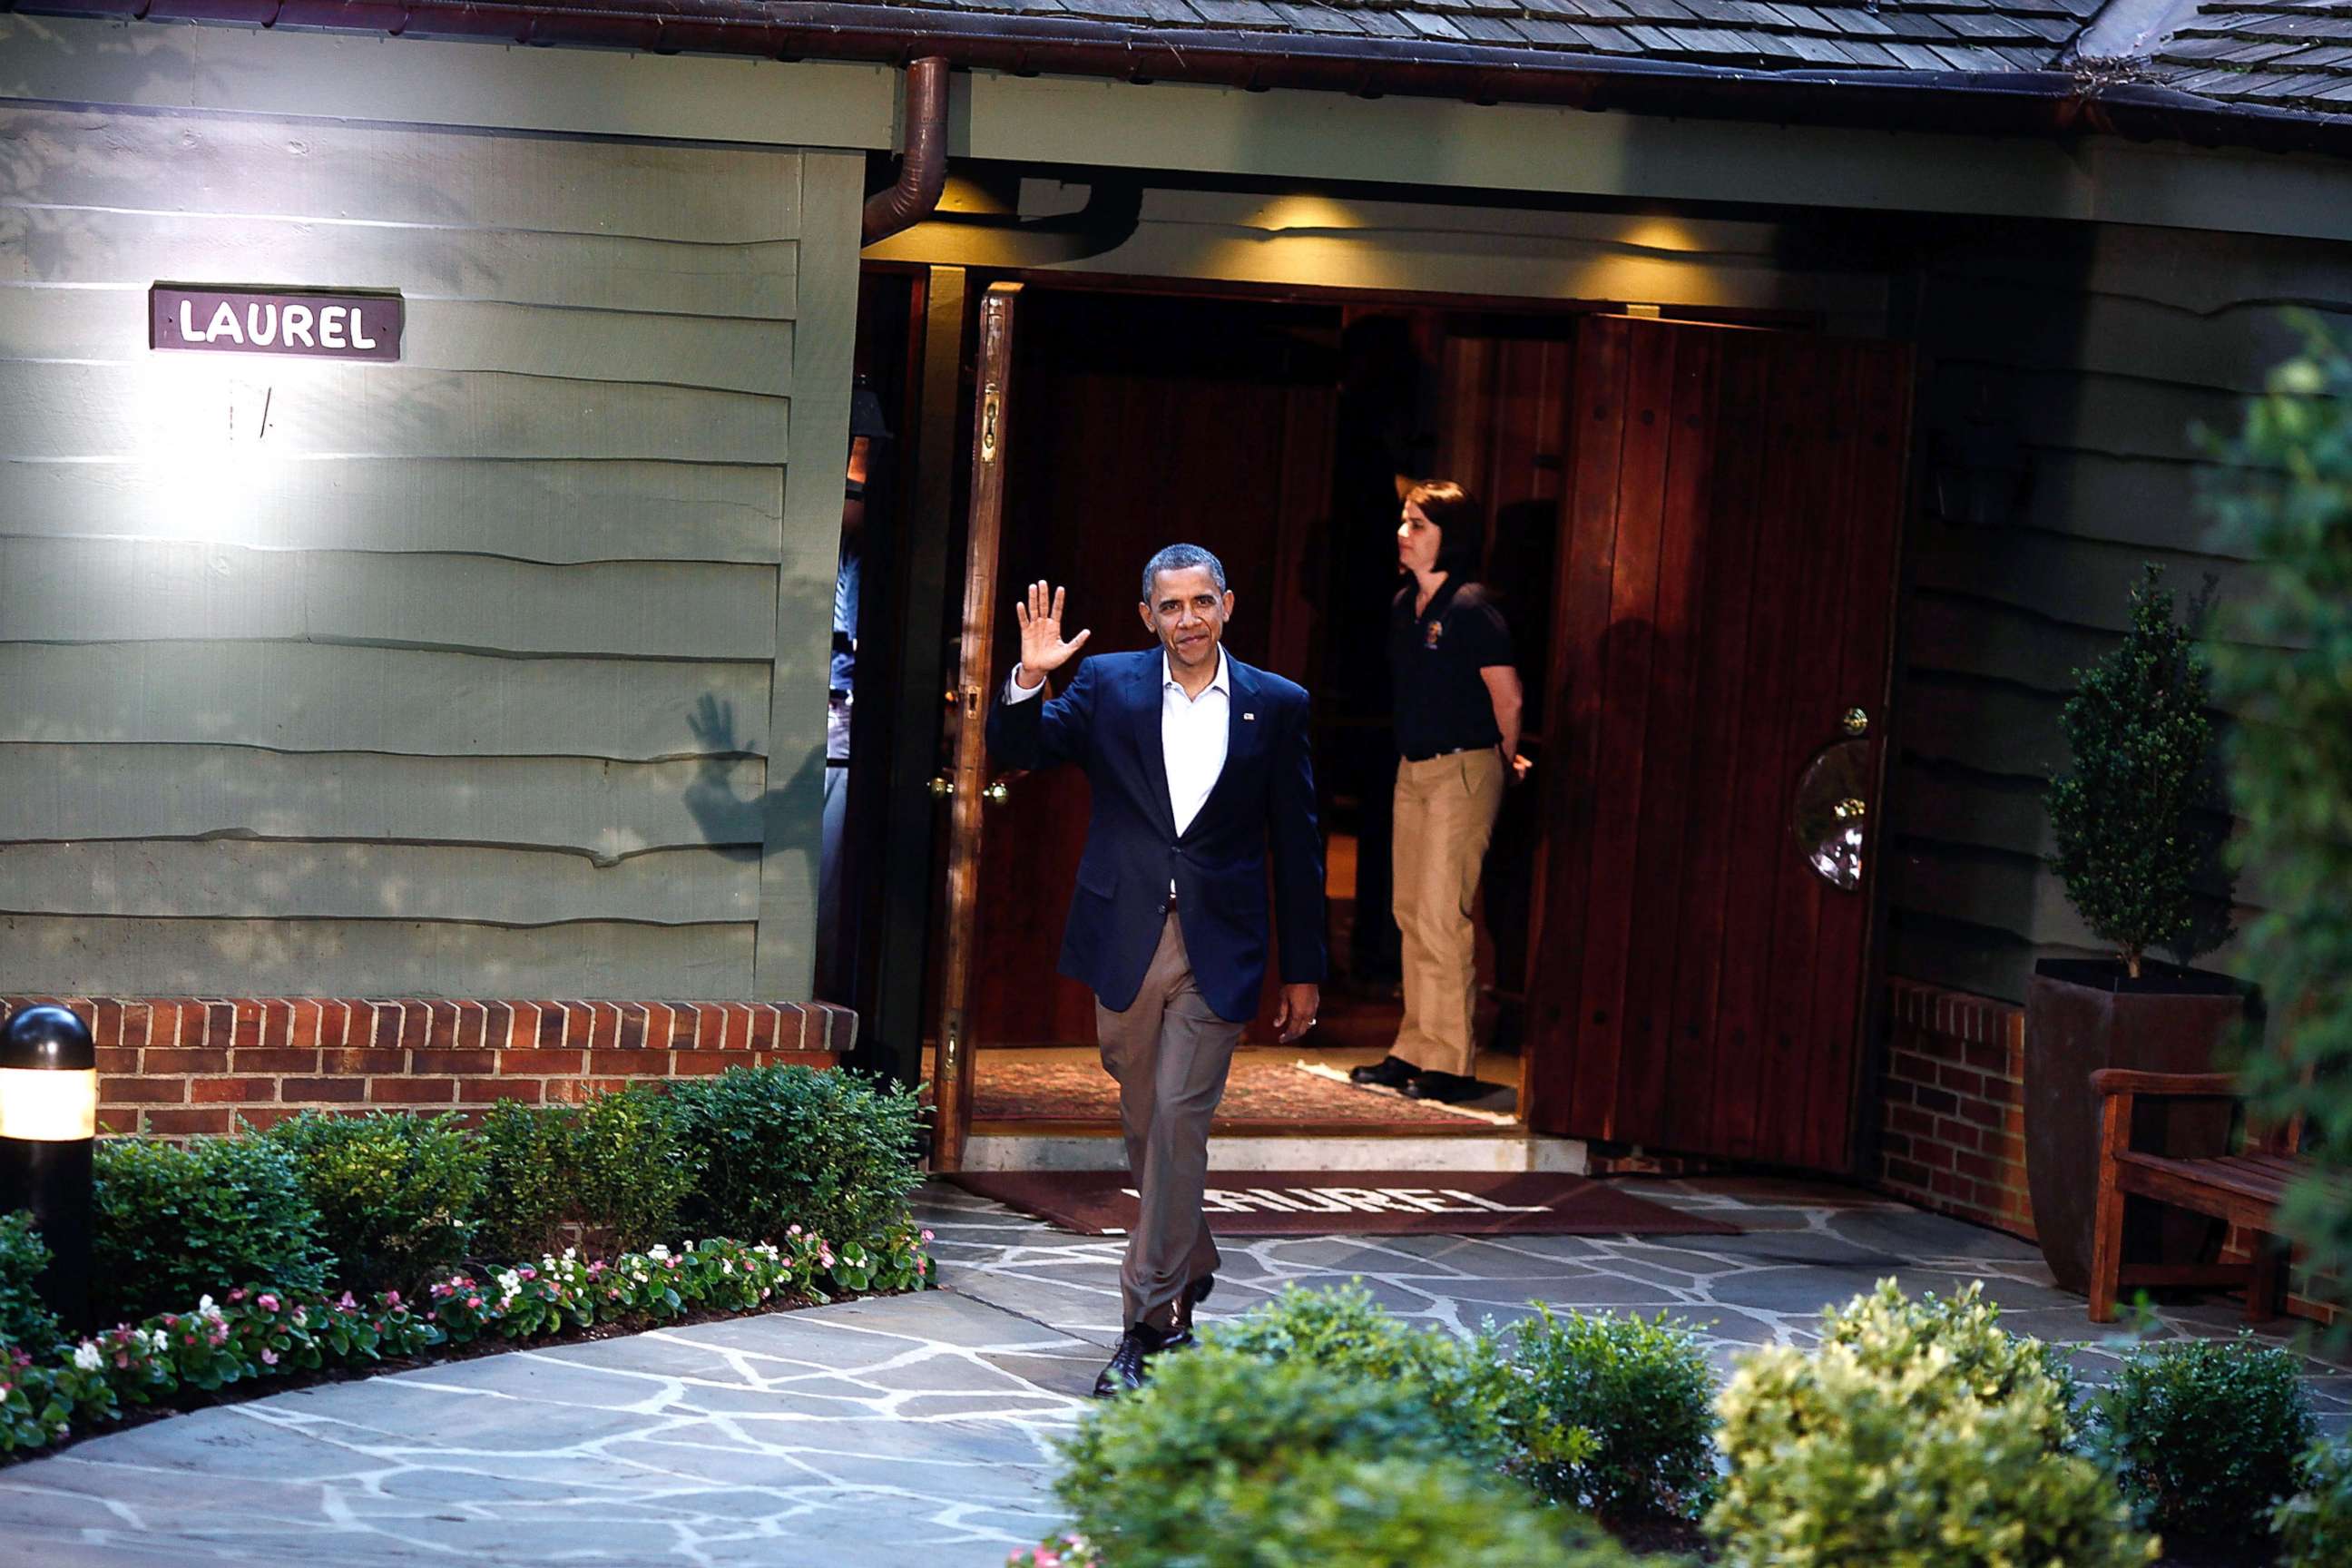 PHOTO: President Barack Obama waves to members of the media before greeting G8 leaders in front of Laurel Lodge at Camp David during the 2012 G8 Summit, May 18, 2012.